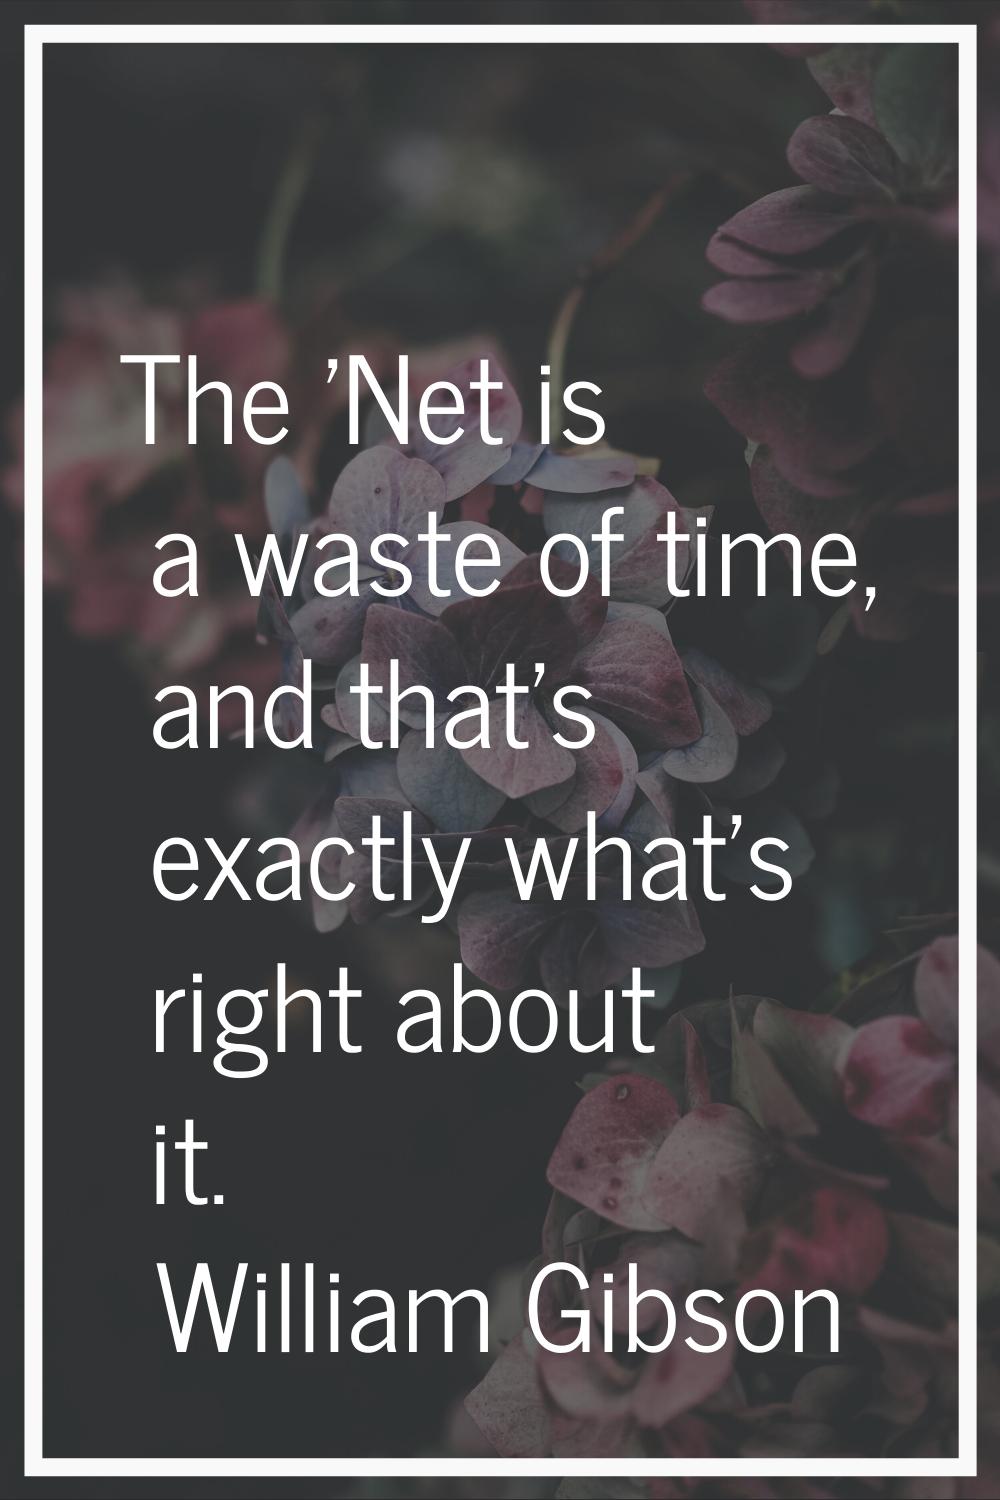 The 'Net is a waste of time, and that's exactly what's right about it.